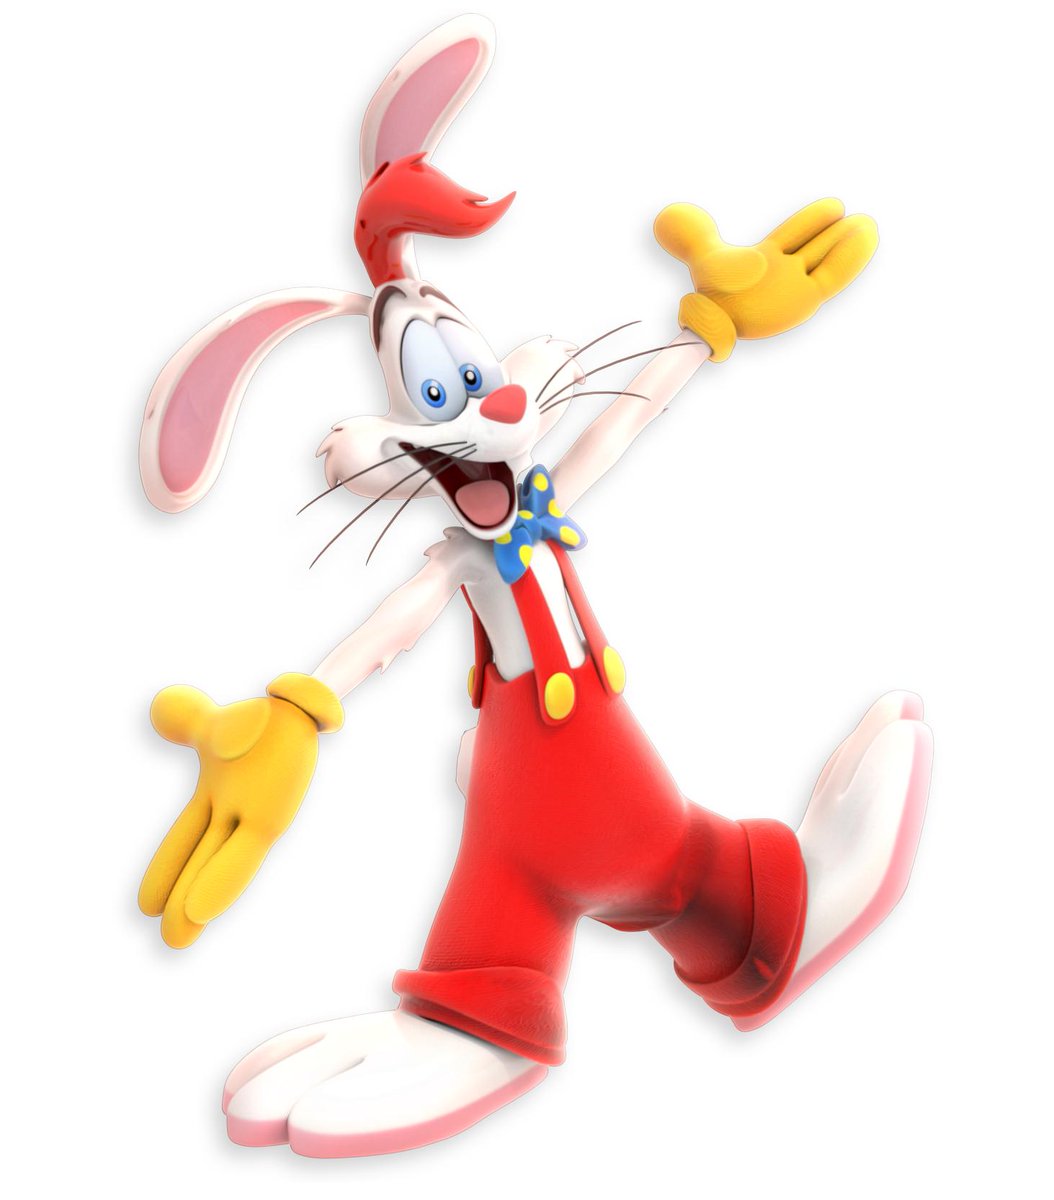 The Roger Rabbit model is complete! 